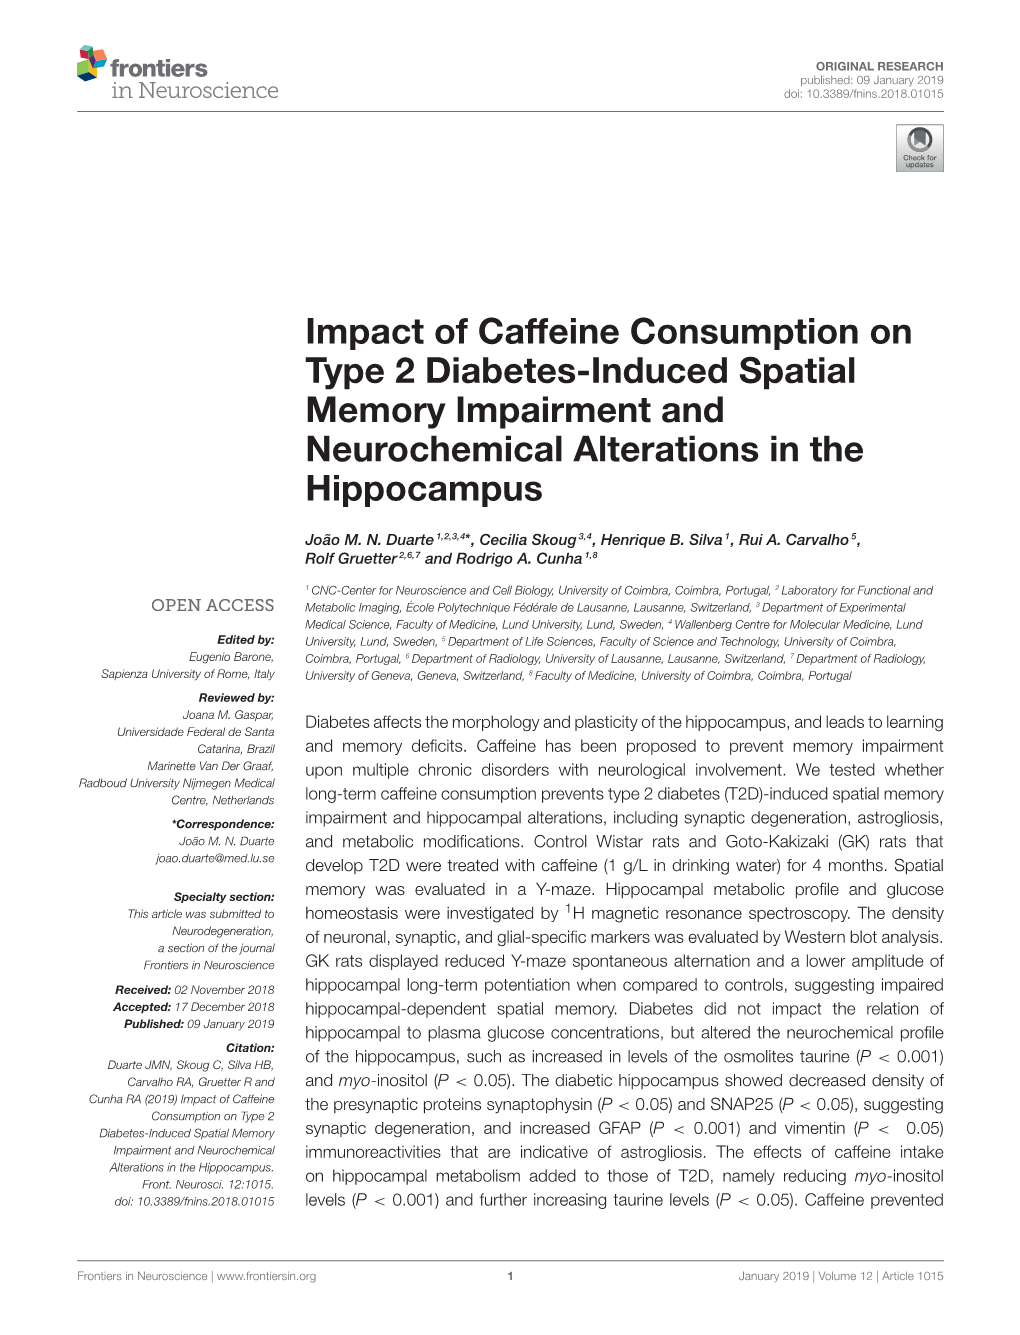 Impact of Caffeine Consumption on Type 2 Diabetes-Induced Spatial Memory Impairment and Neurochemical Alterations in the Hippocampus